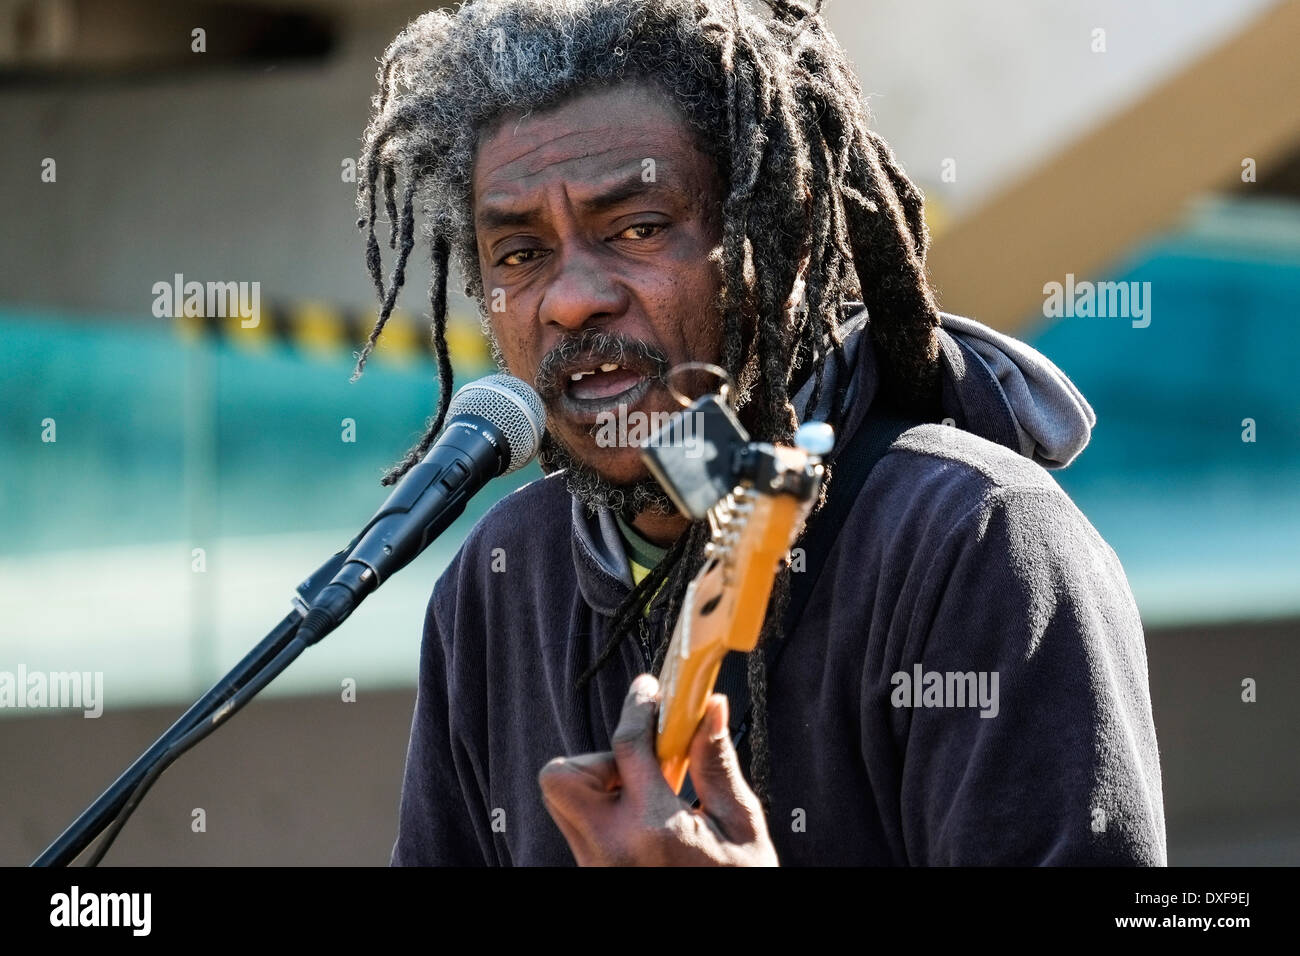 A Rastafarian busker performing on the South Bank in London. Stock Photo